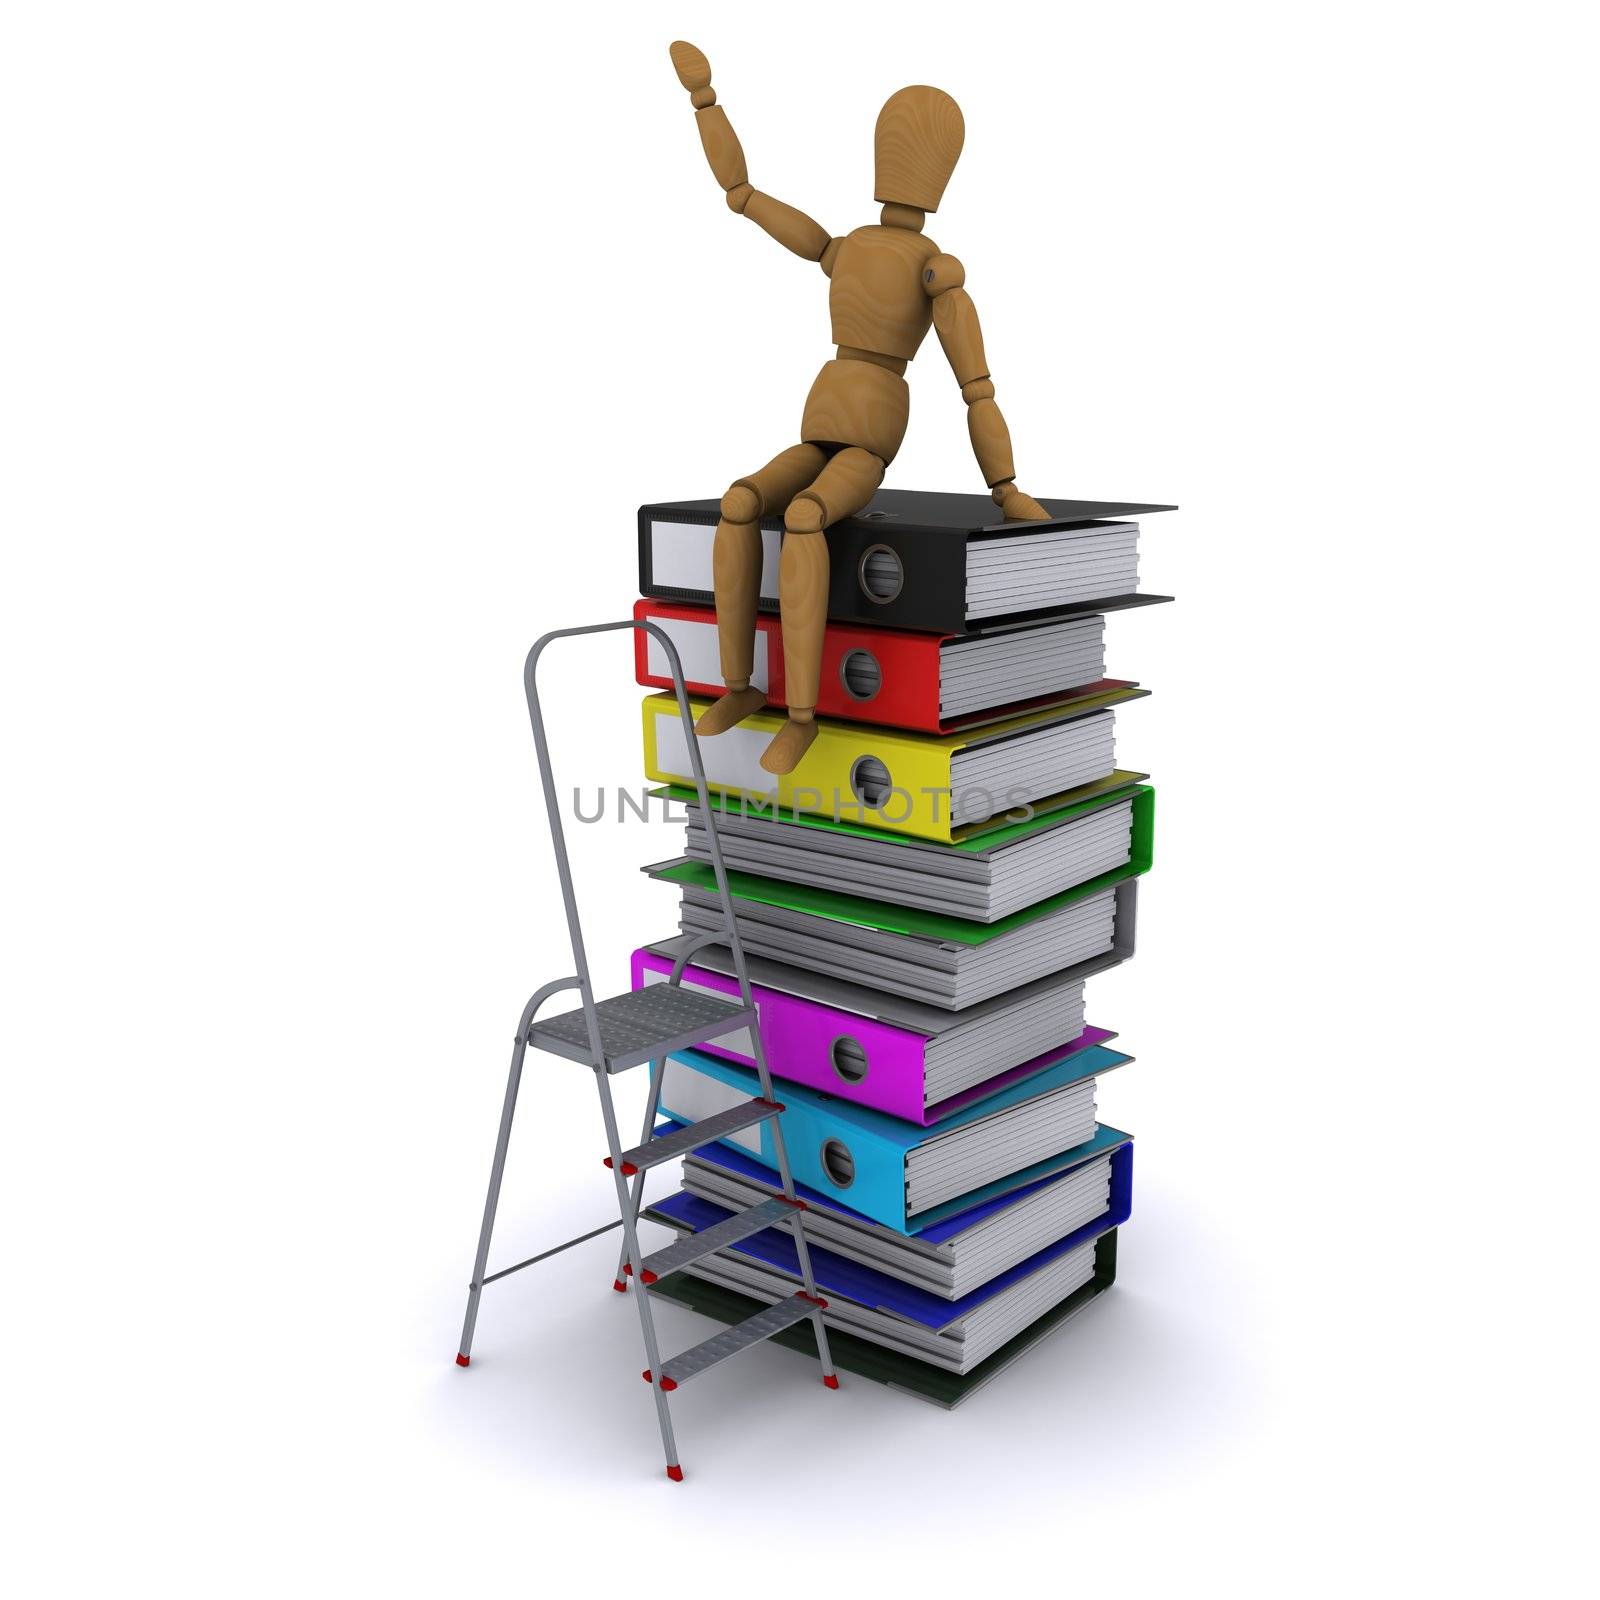 The wooden man climbed the ladder on the stack of books. 3D rendering